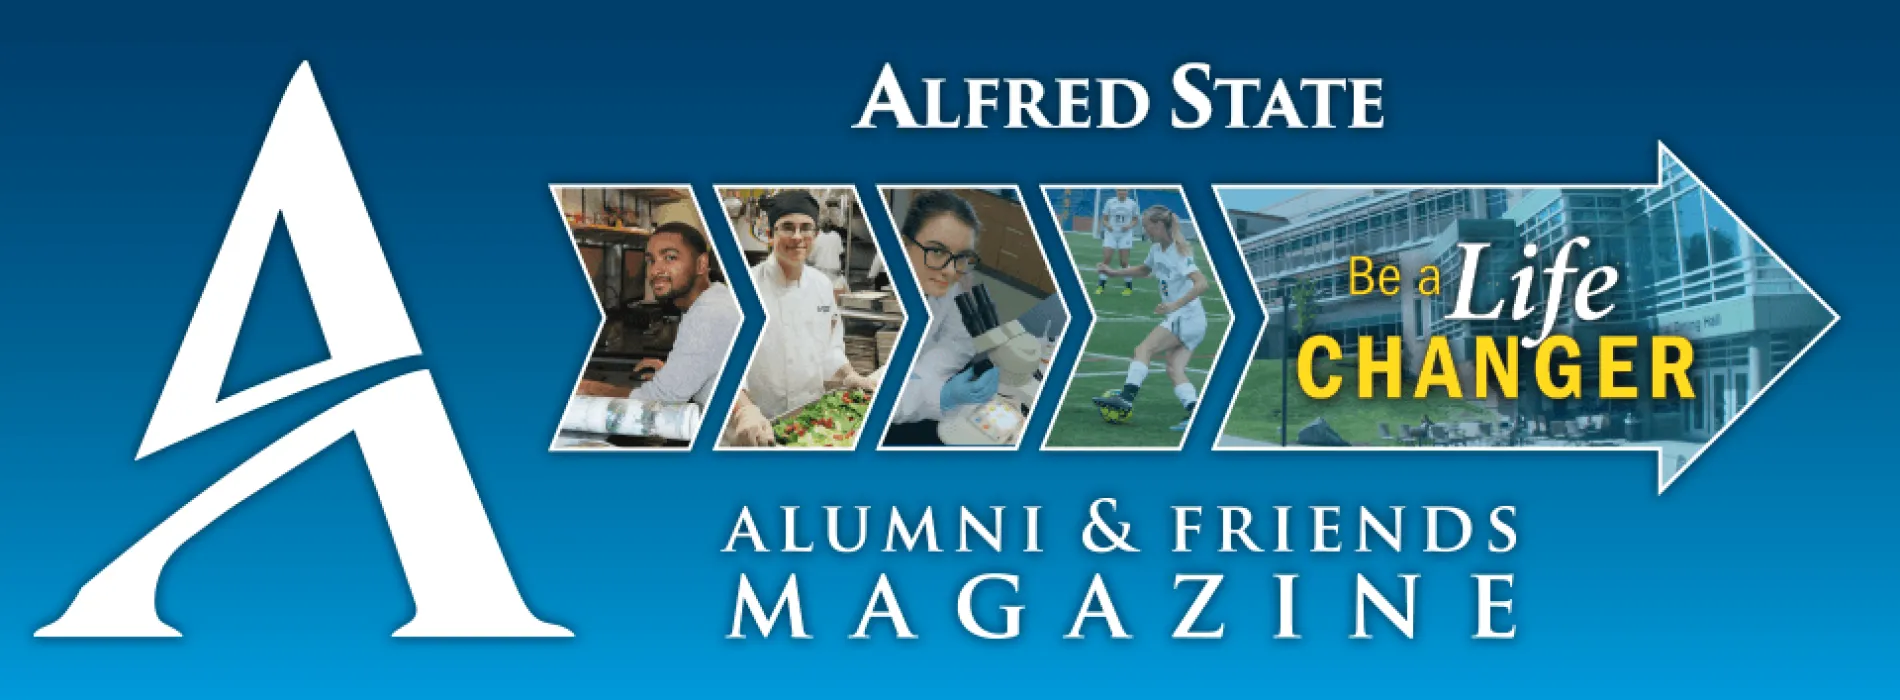 Alfred State Alumni & Friends Magazine Logo. Be A Life Changer arrow graphic with student photos